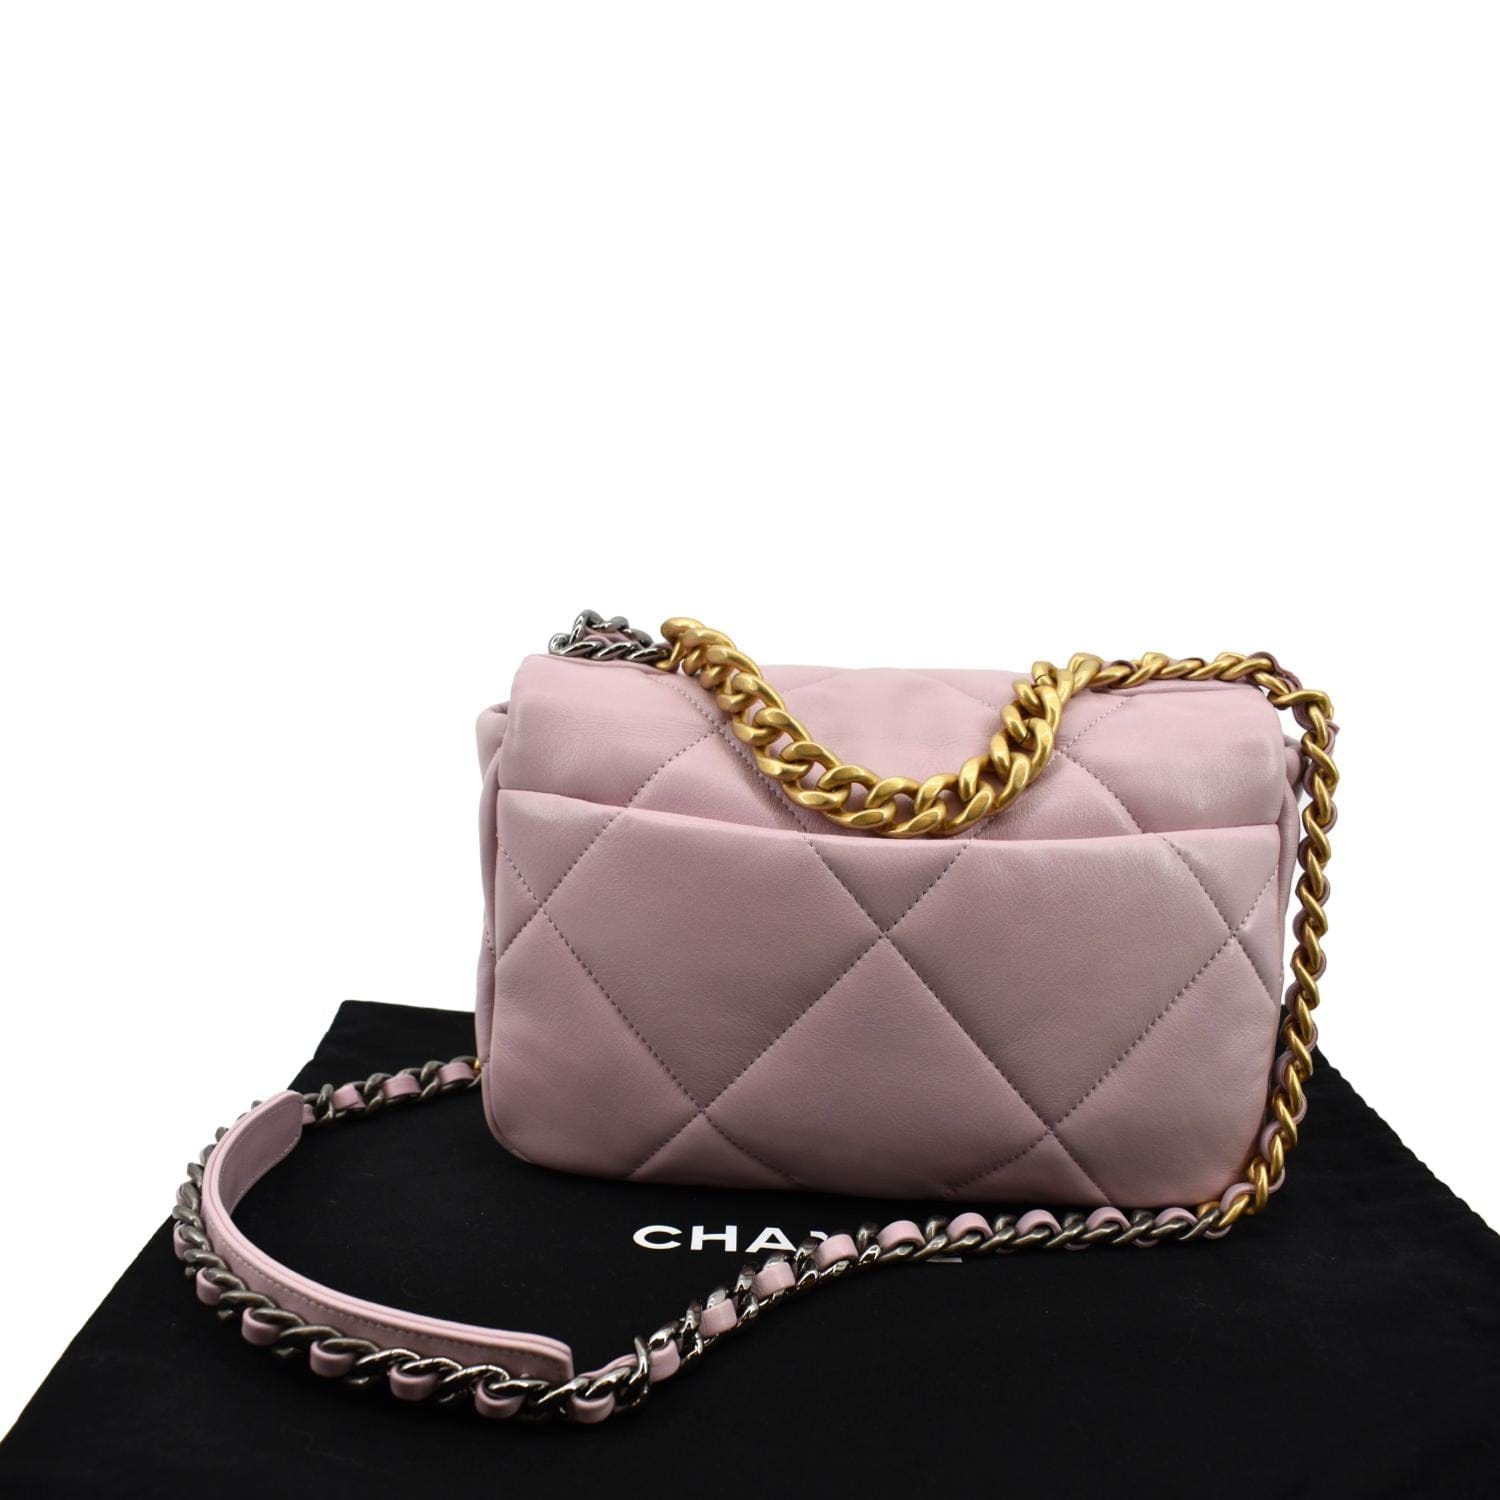 pink sparkly chanel bag